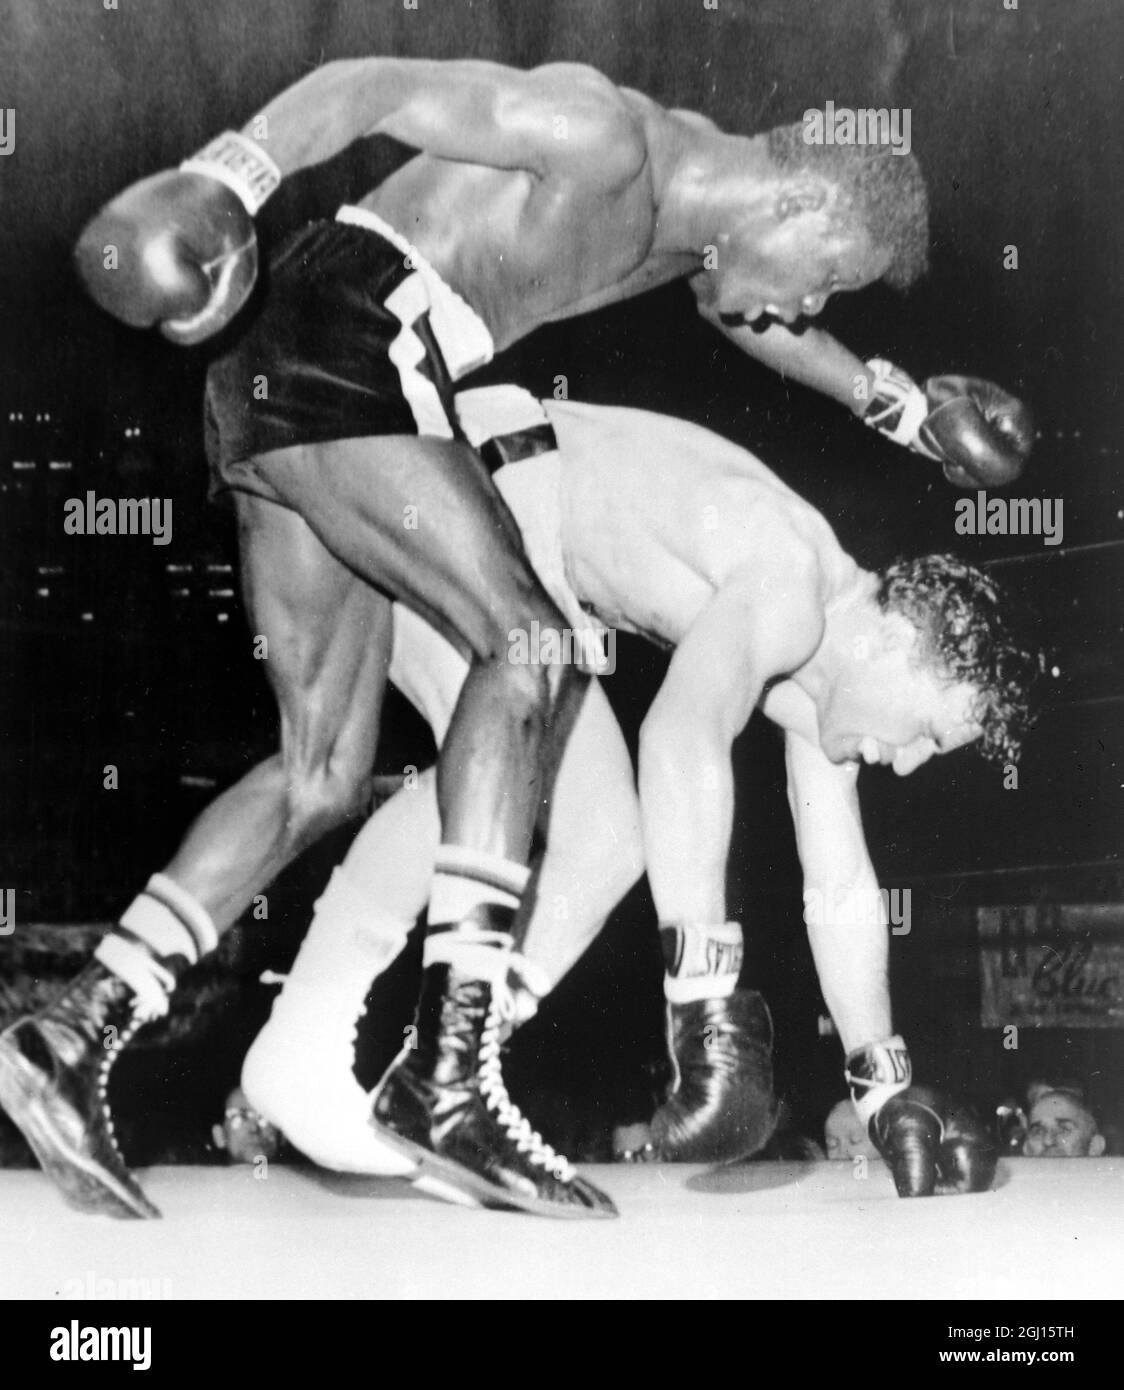 BOXER JORGE FERNANDEZ FALLS IN ACTION WITH EMILE GRIFFITH IN LAS VEGAS - ; 10 DECEMBER 1962 Stock Photo